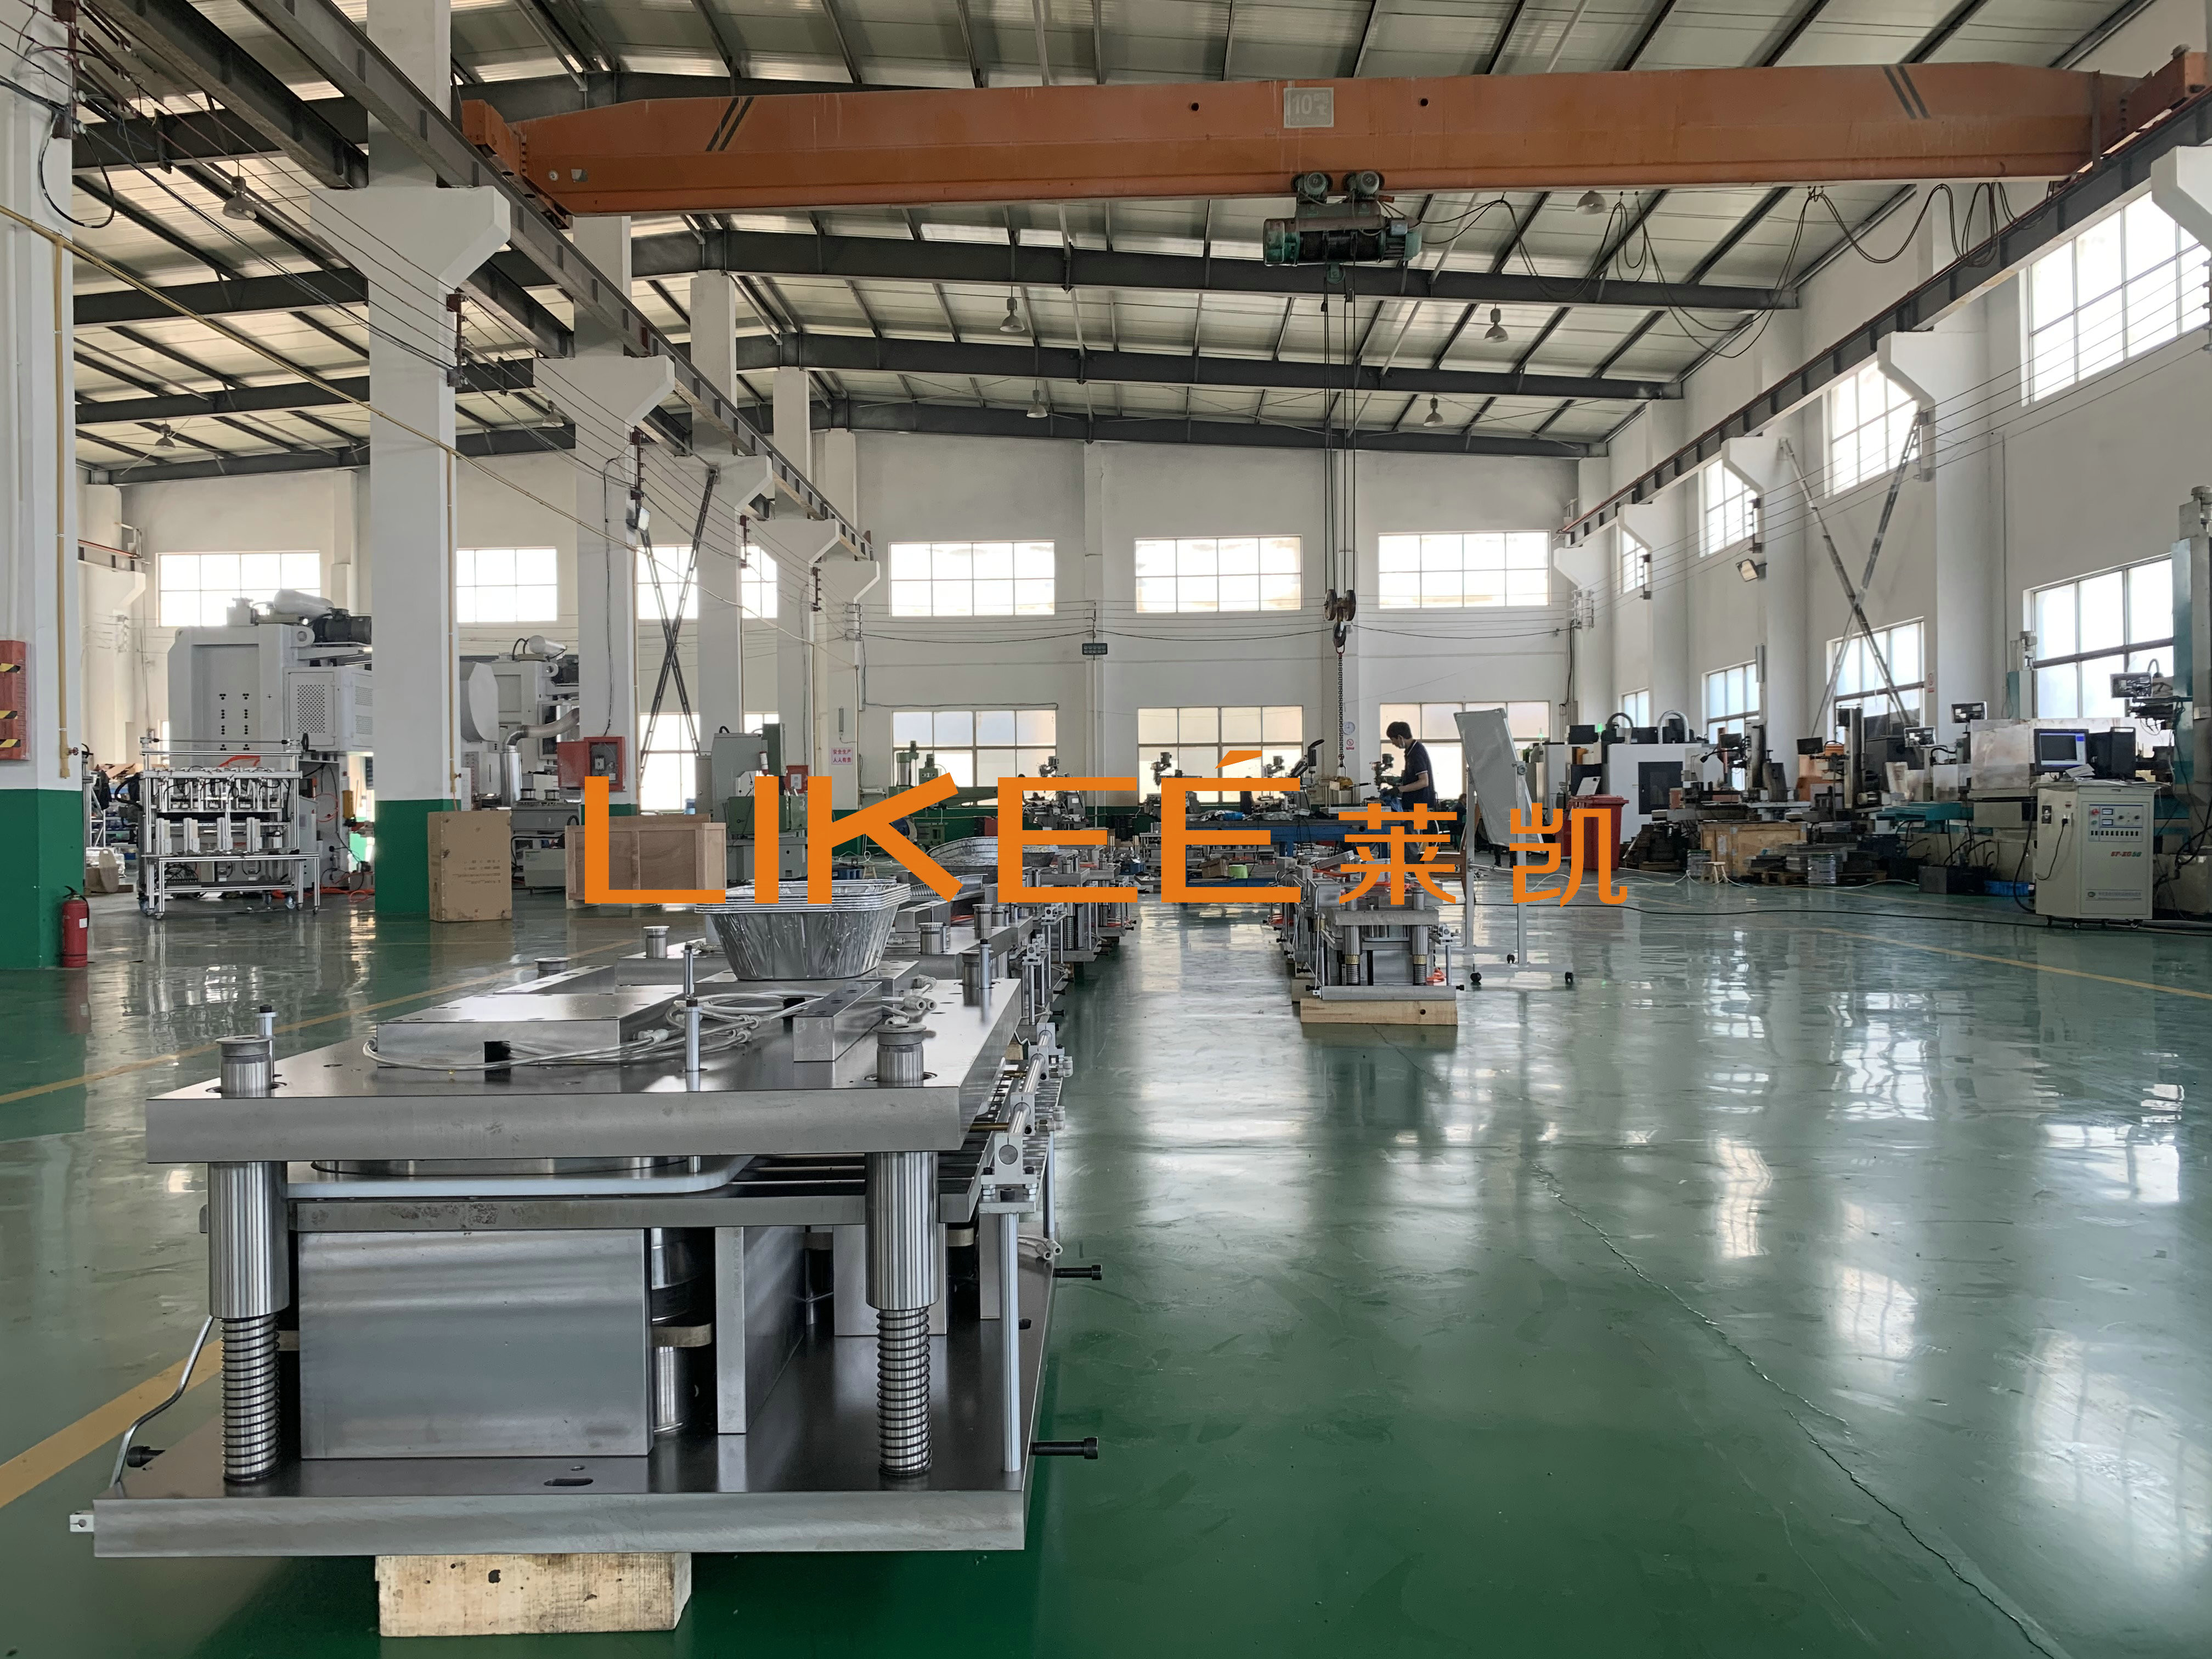 Shanghai Likee Packaging Products Co., Ltd.